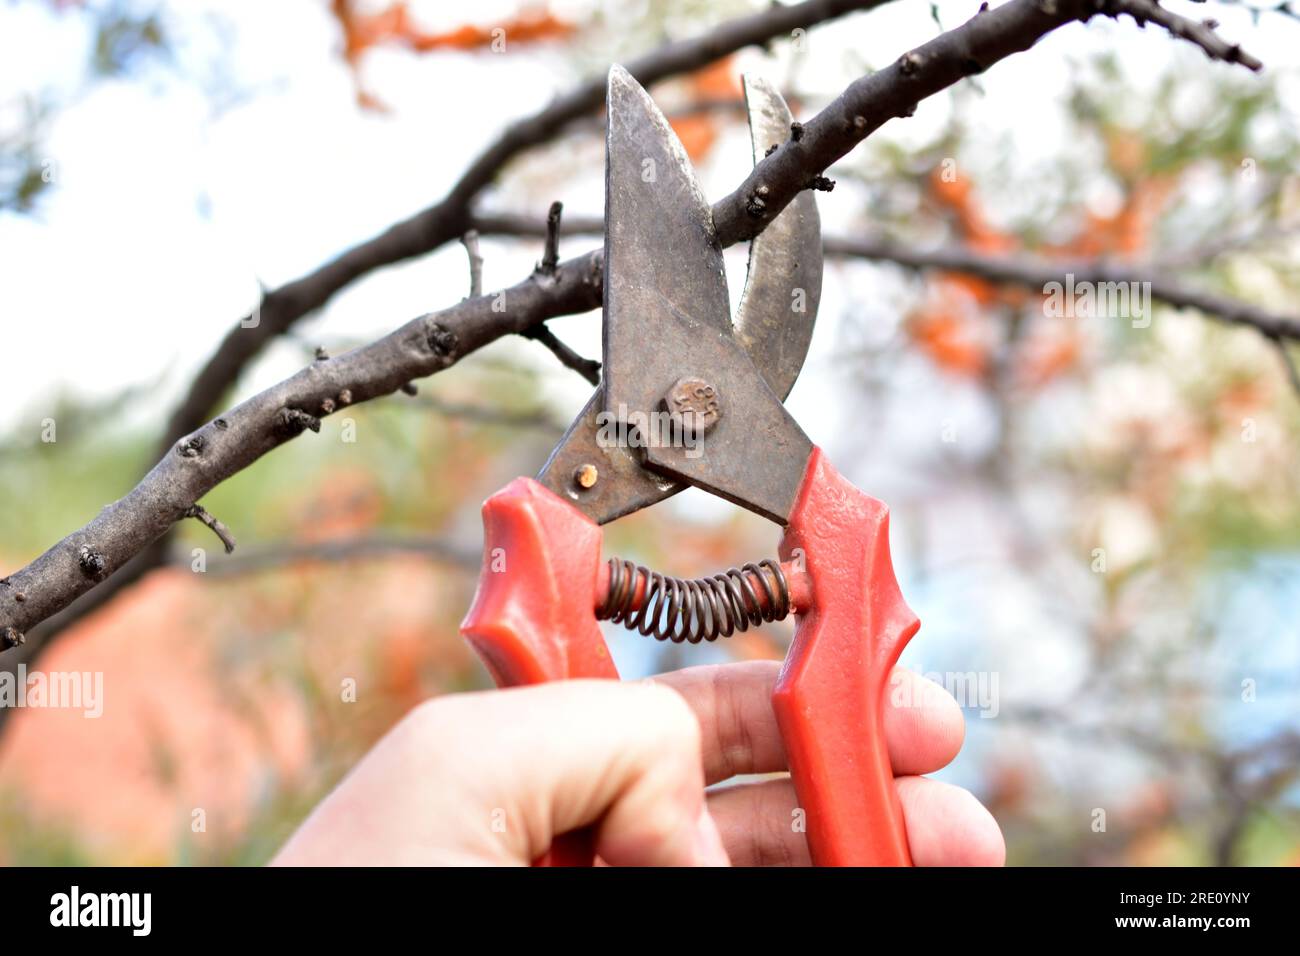 Pruning garden plants with a special cutter Stock Photo